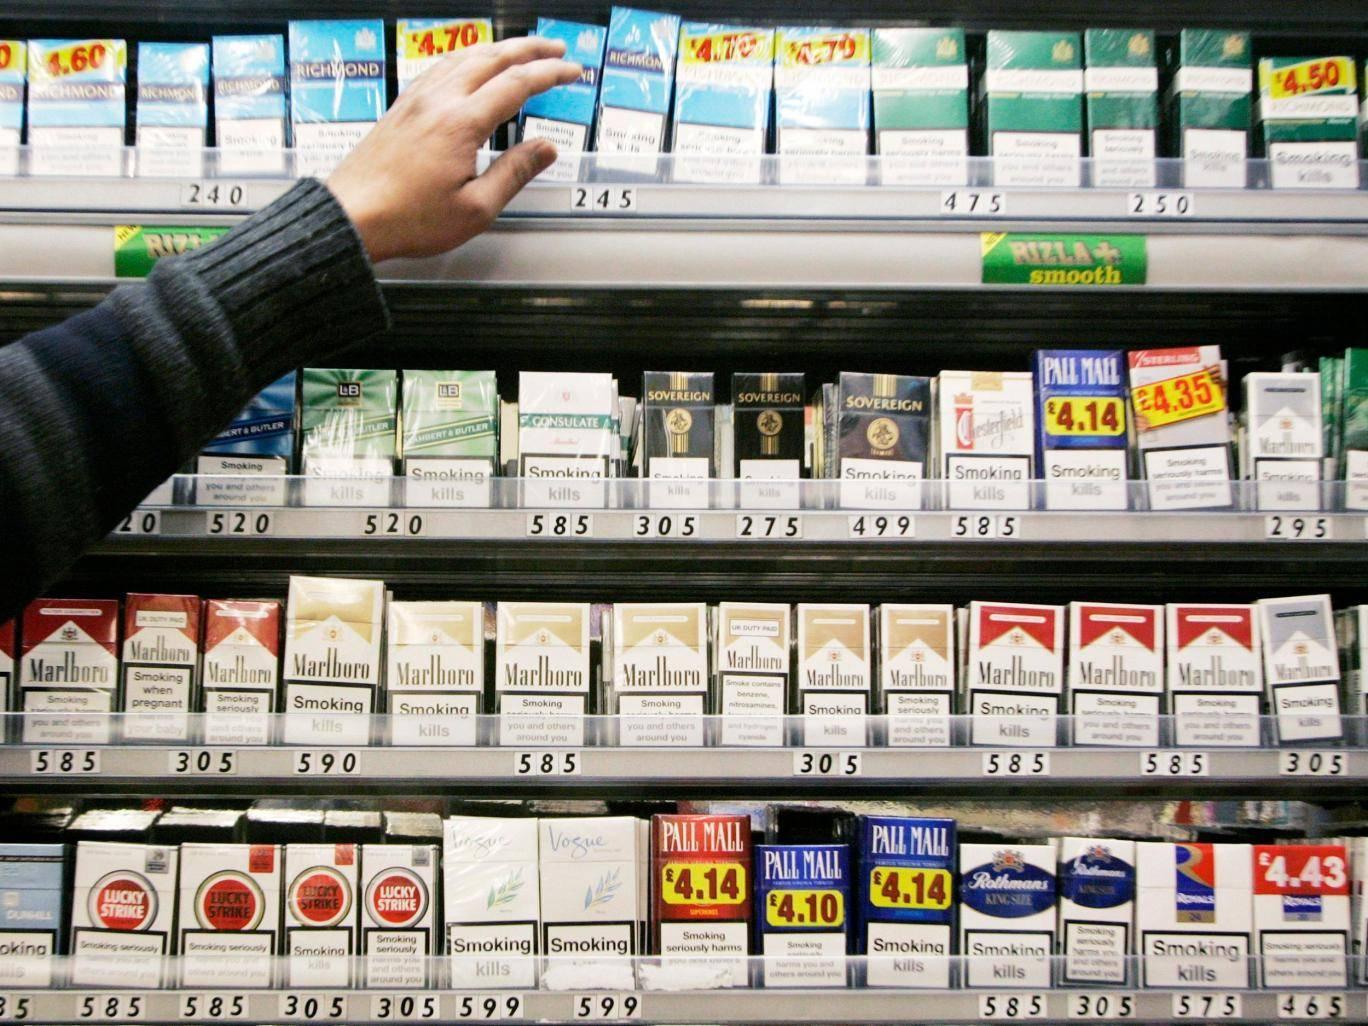 Palmer & Harvey is the UK’s leading supplier of tobacco but collapsed on Tuesday